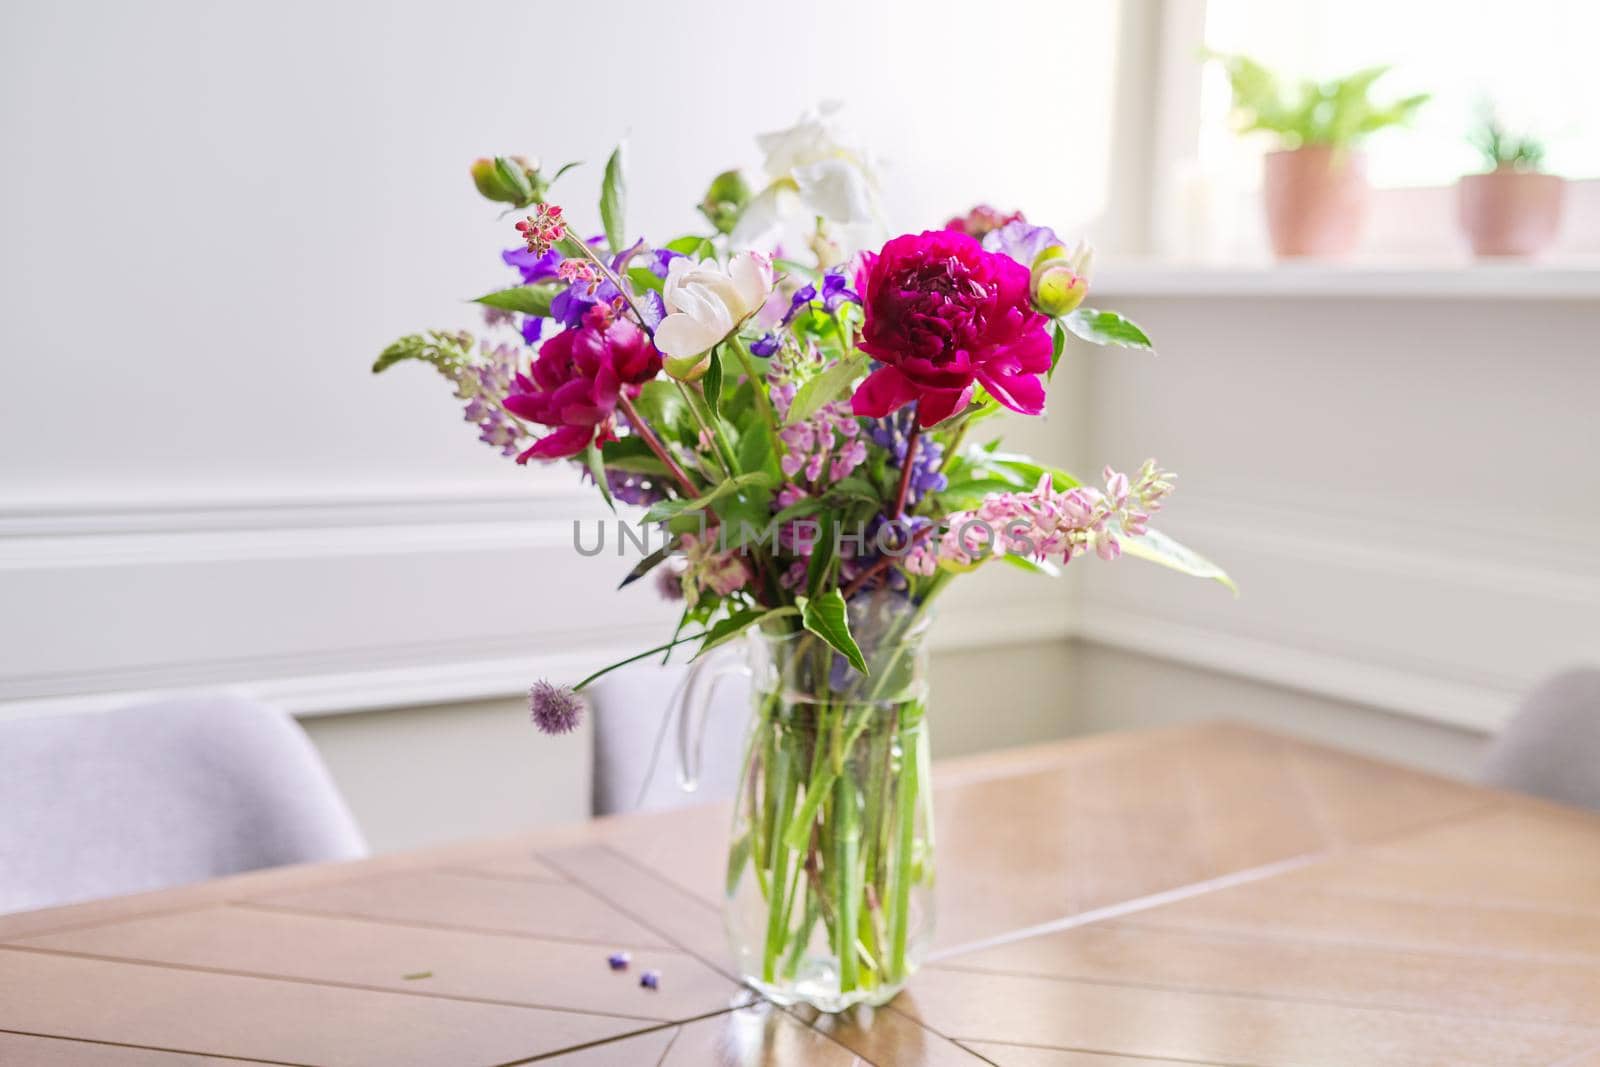 Bouquet of bright flowers on the table in jug. Flowers and buds of peonies irises lupine, season spring summer, home natural decor, holiday, gift concept